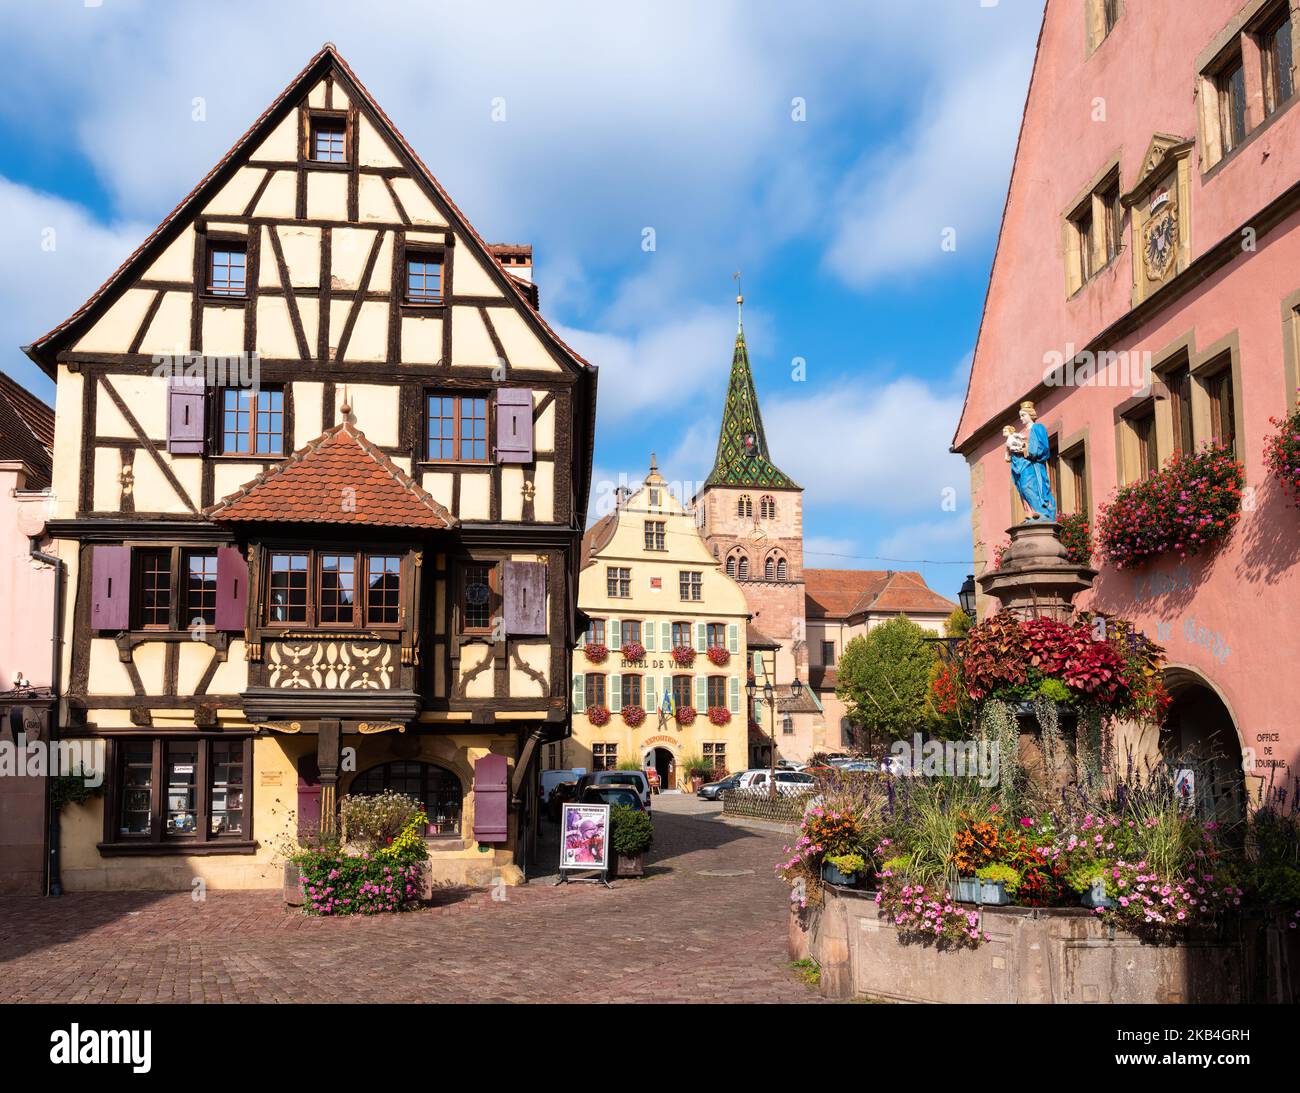 Turckheim, France - October 12, 2022: The old medieval town of Turckheim in Alsace. Stock Photo